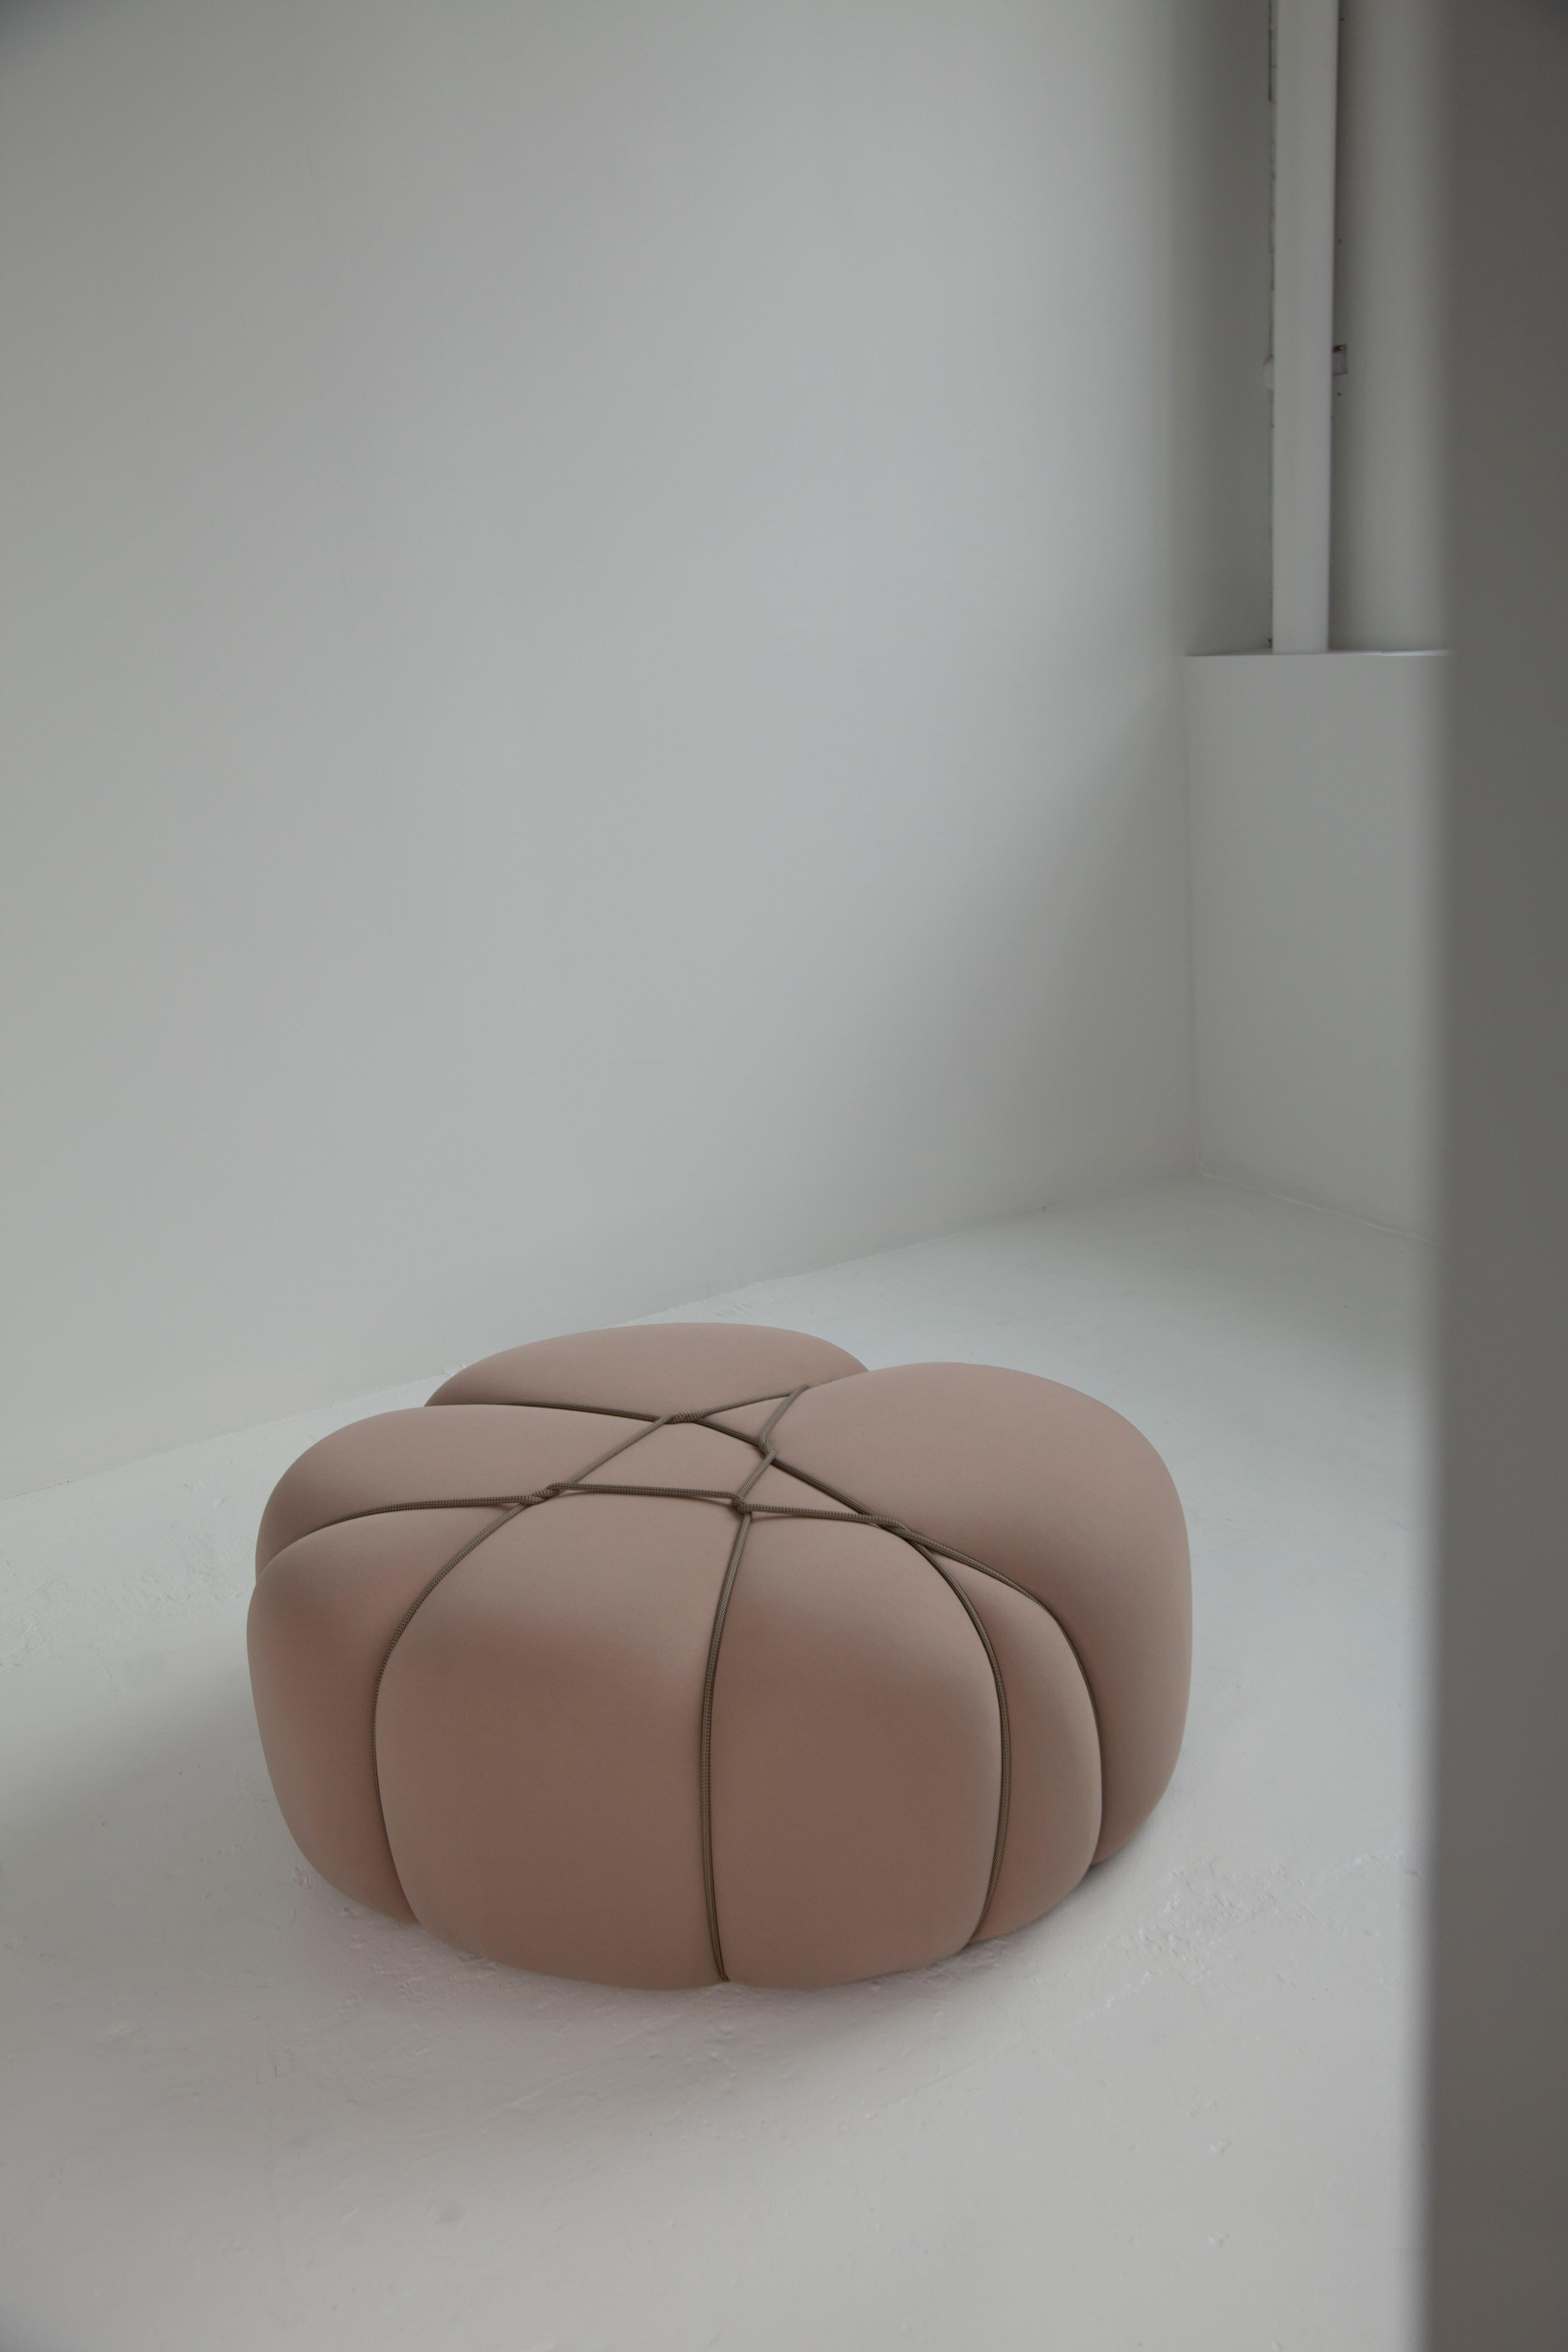 The poufs are a form of modular furniture designed for both relaxation and seating. They are constructed from soft foam covered with a thick, elastic fabric that conceals any visible seams. Drawing inspiration from the intricate art of Shibari, a